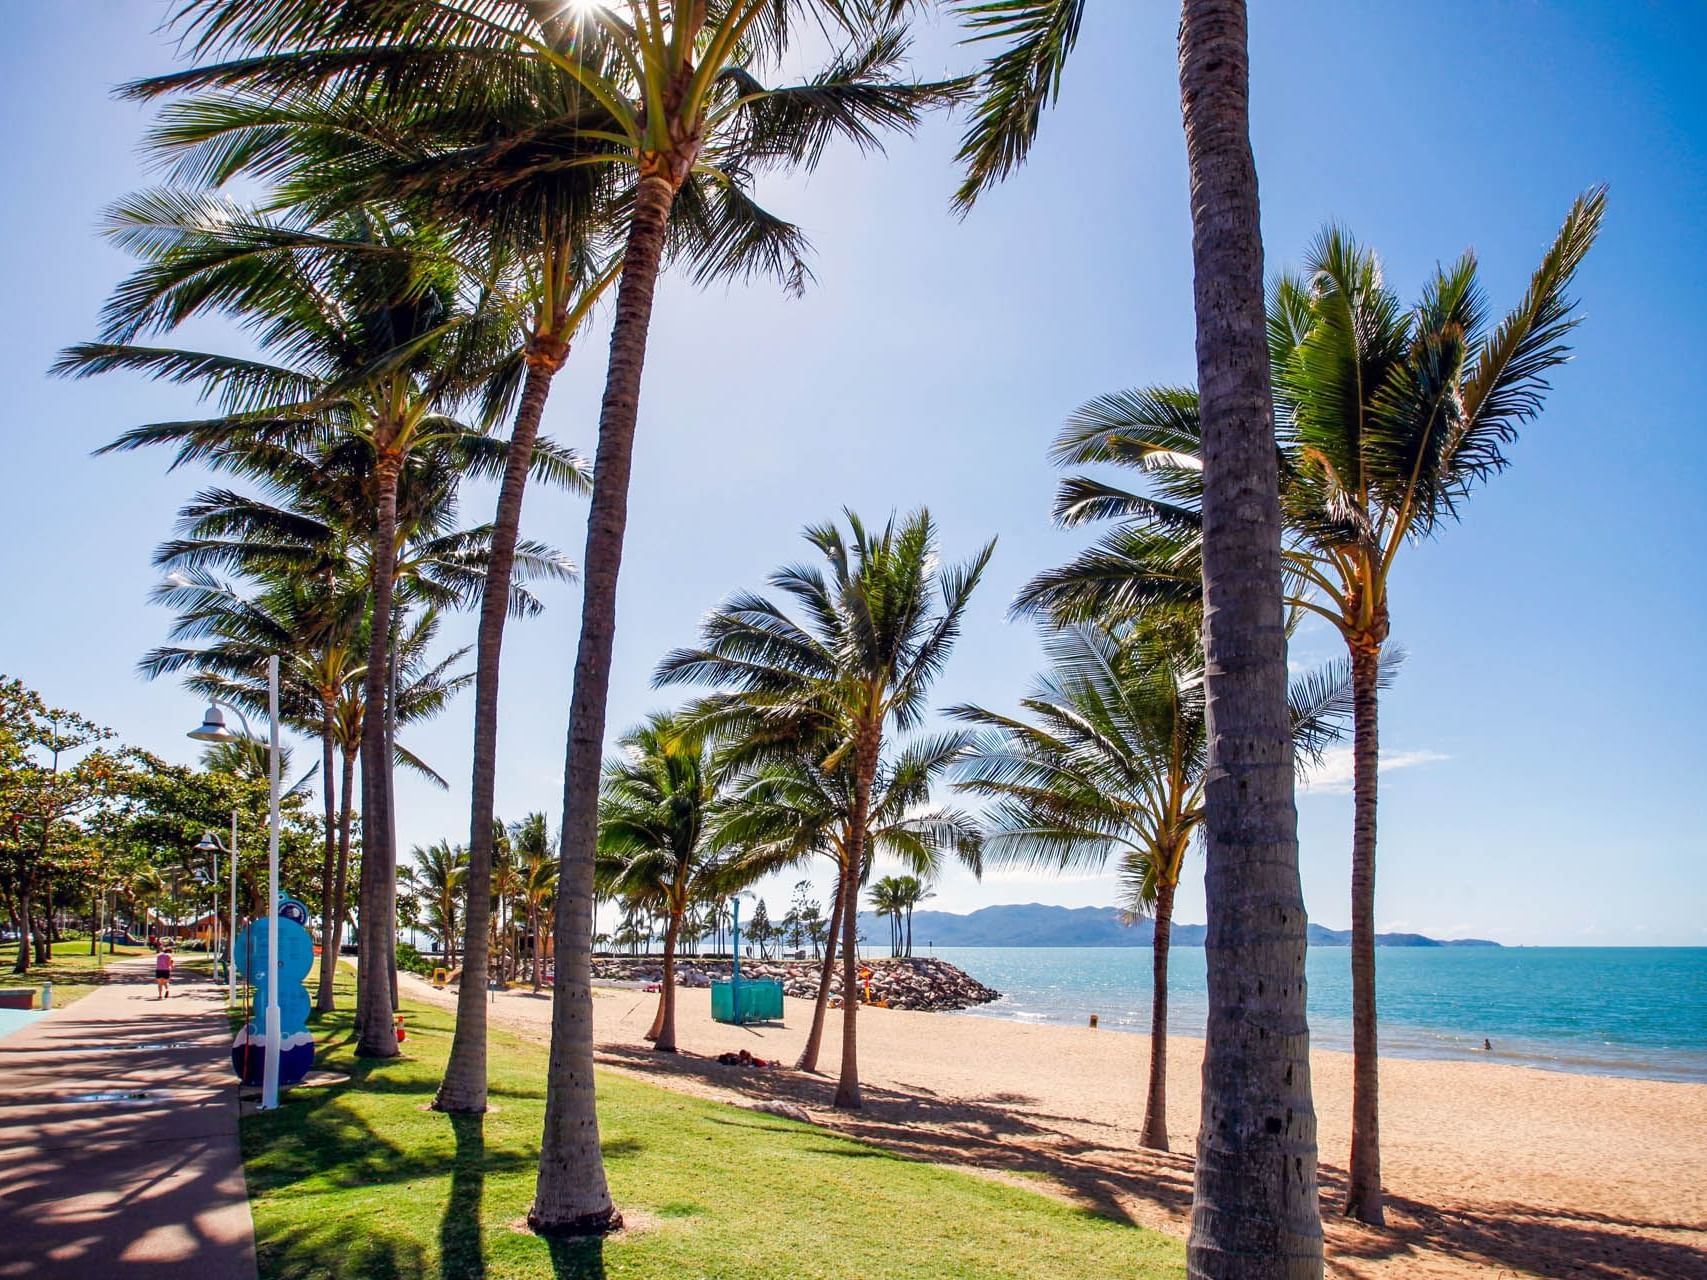 Palm trees, walking path & beach view in The Strand Park near Hotel Grand Chancellor Townsville